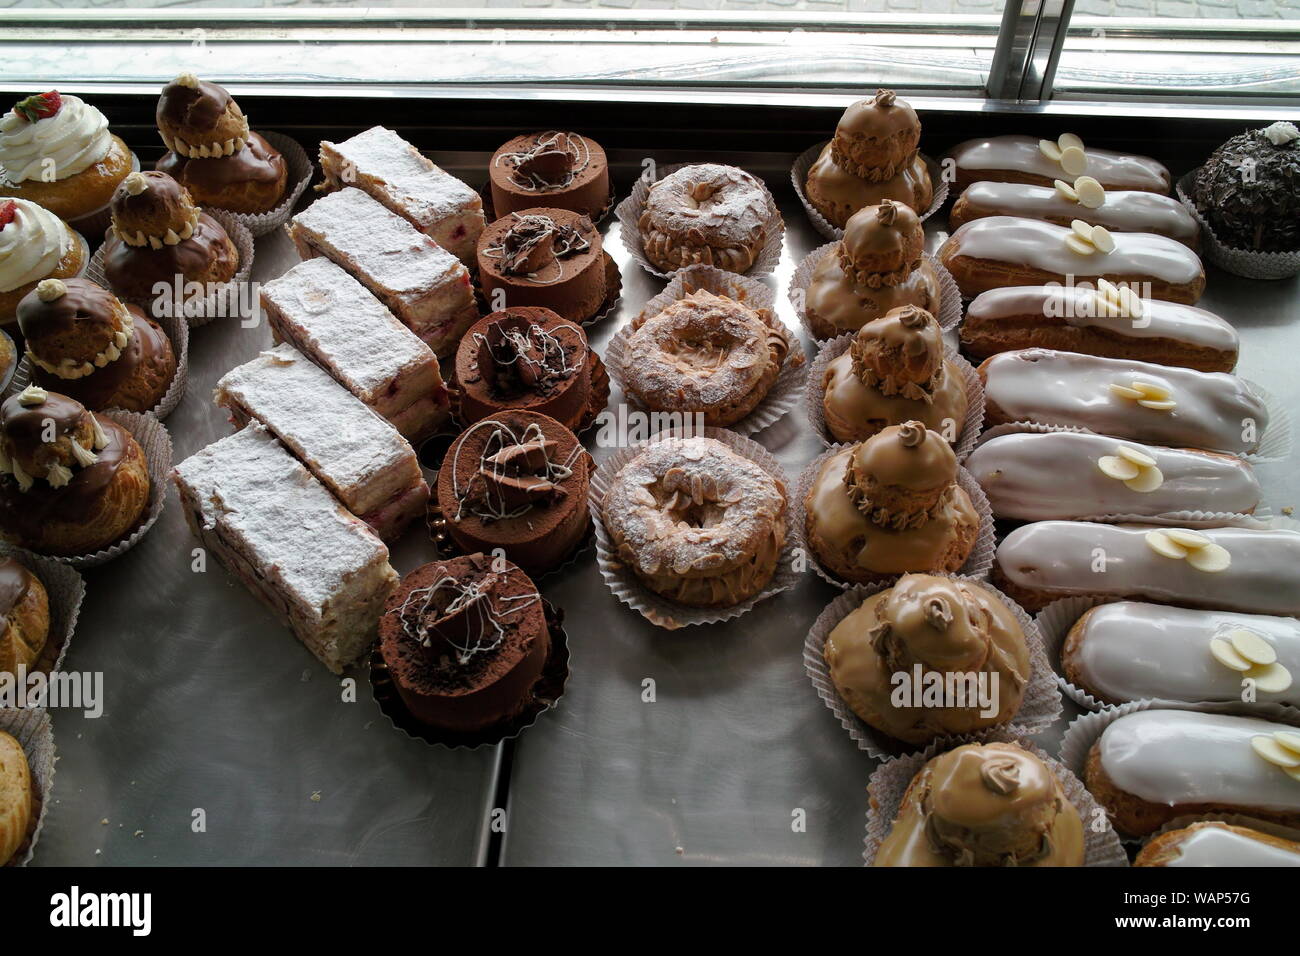 AJAXNETPHOTO. 2008. AILLY SUR NOYE, FRANCE. - CAKE FEST - ASSORTED DECORATED CAKES IN THE WINDOW OF LOCAL BOULANGERIE.PHOTO:JONATHAN EASTLAND/AJAX REF:DP1 80904 82 Stock Photo